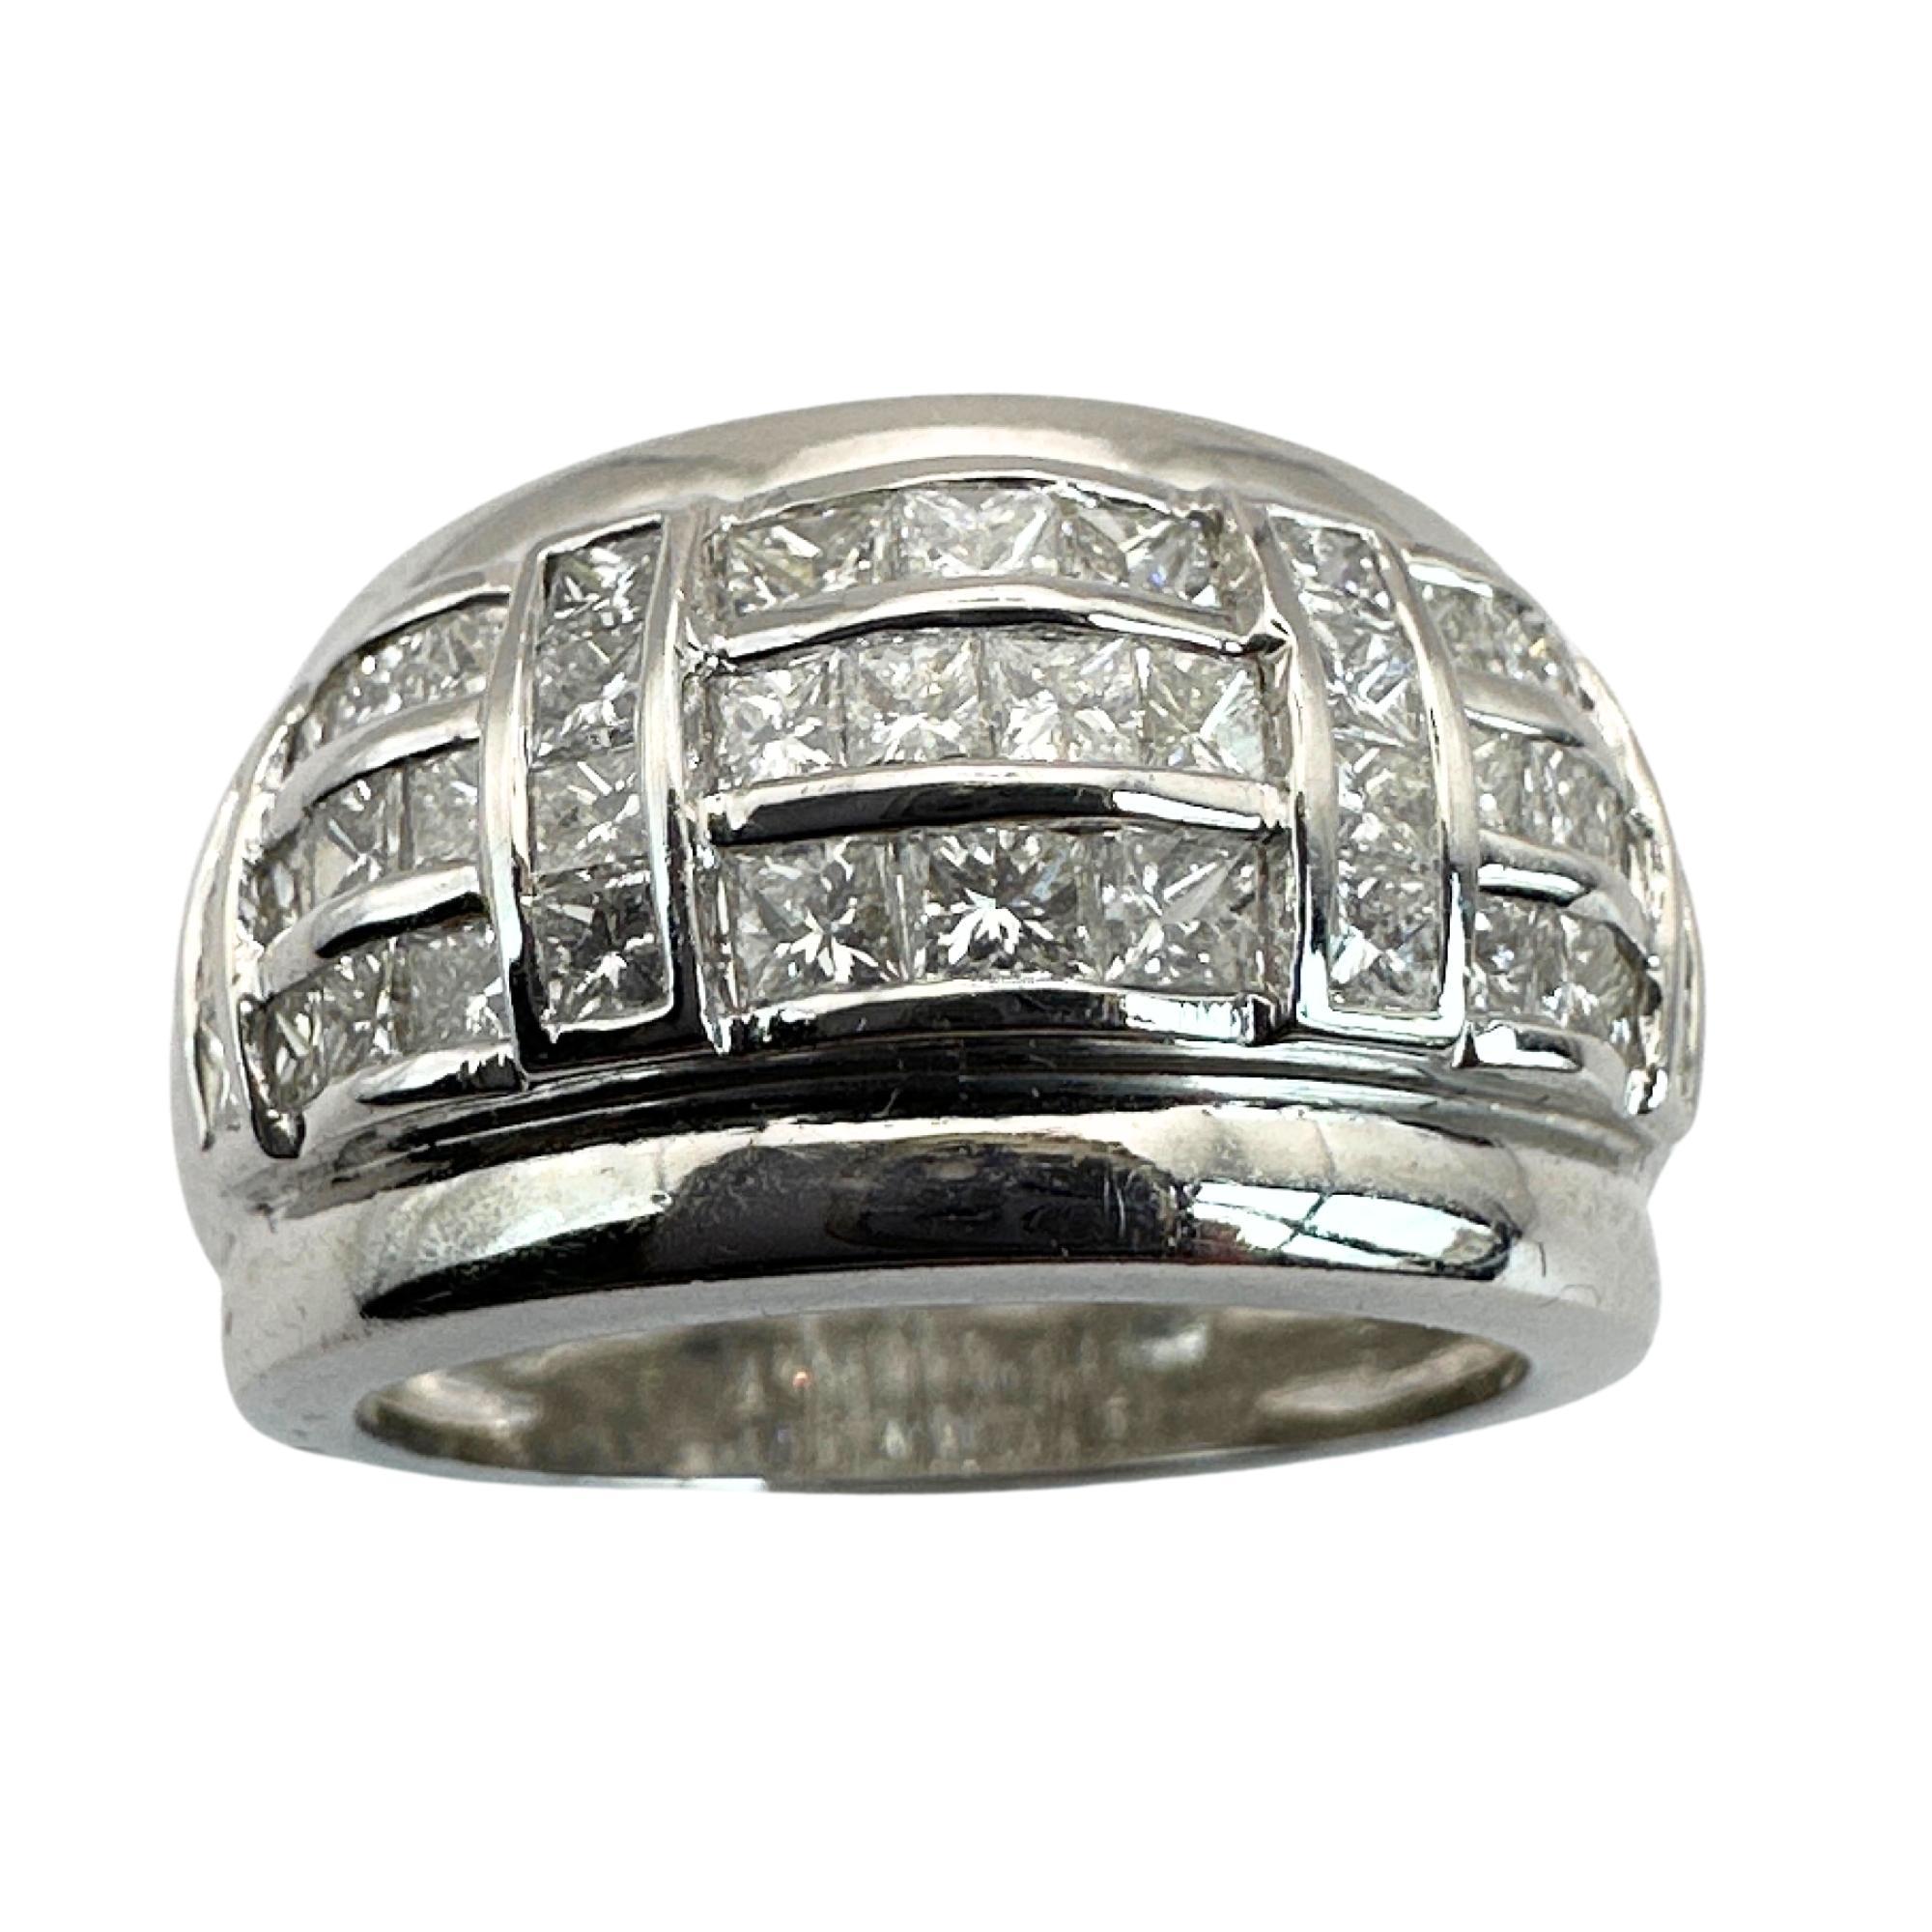 Indulge in luxury with our 18k Diamond Wide Band Ring. Crafted from 18k white gold, this ring boasts stunning 1.53 carat diamonds in a timeless wide band design. With a size 7 and weighing 11.1 grams, this piece is as elegant as it is substantial.